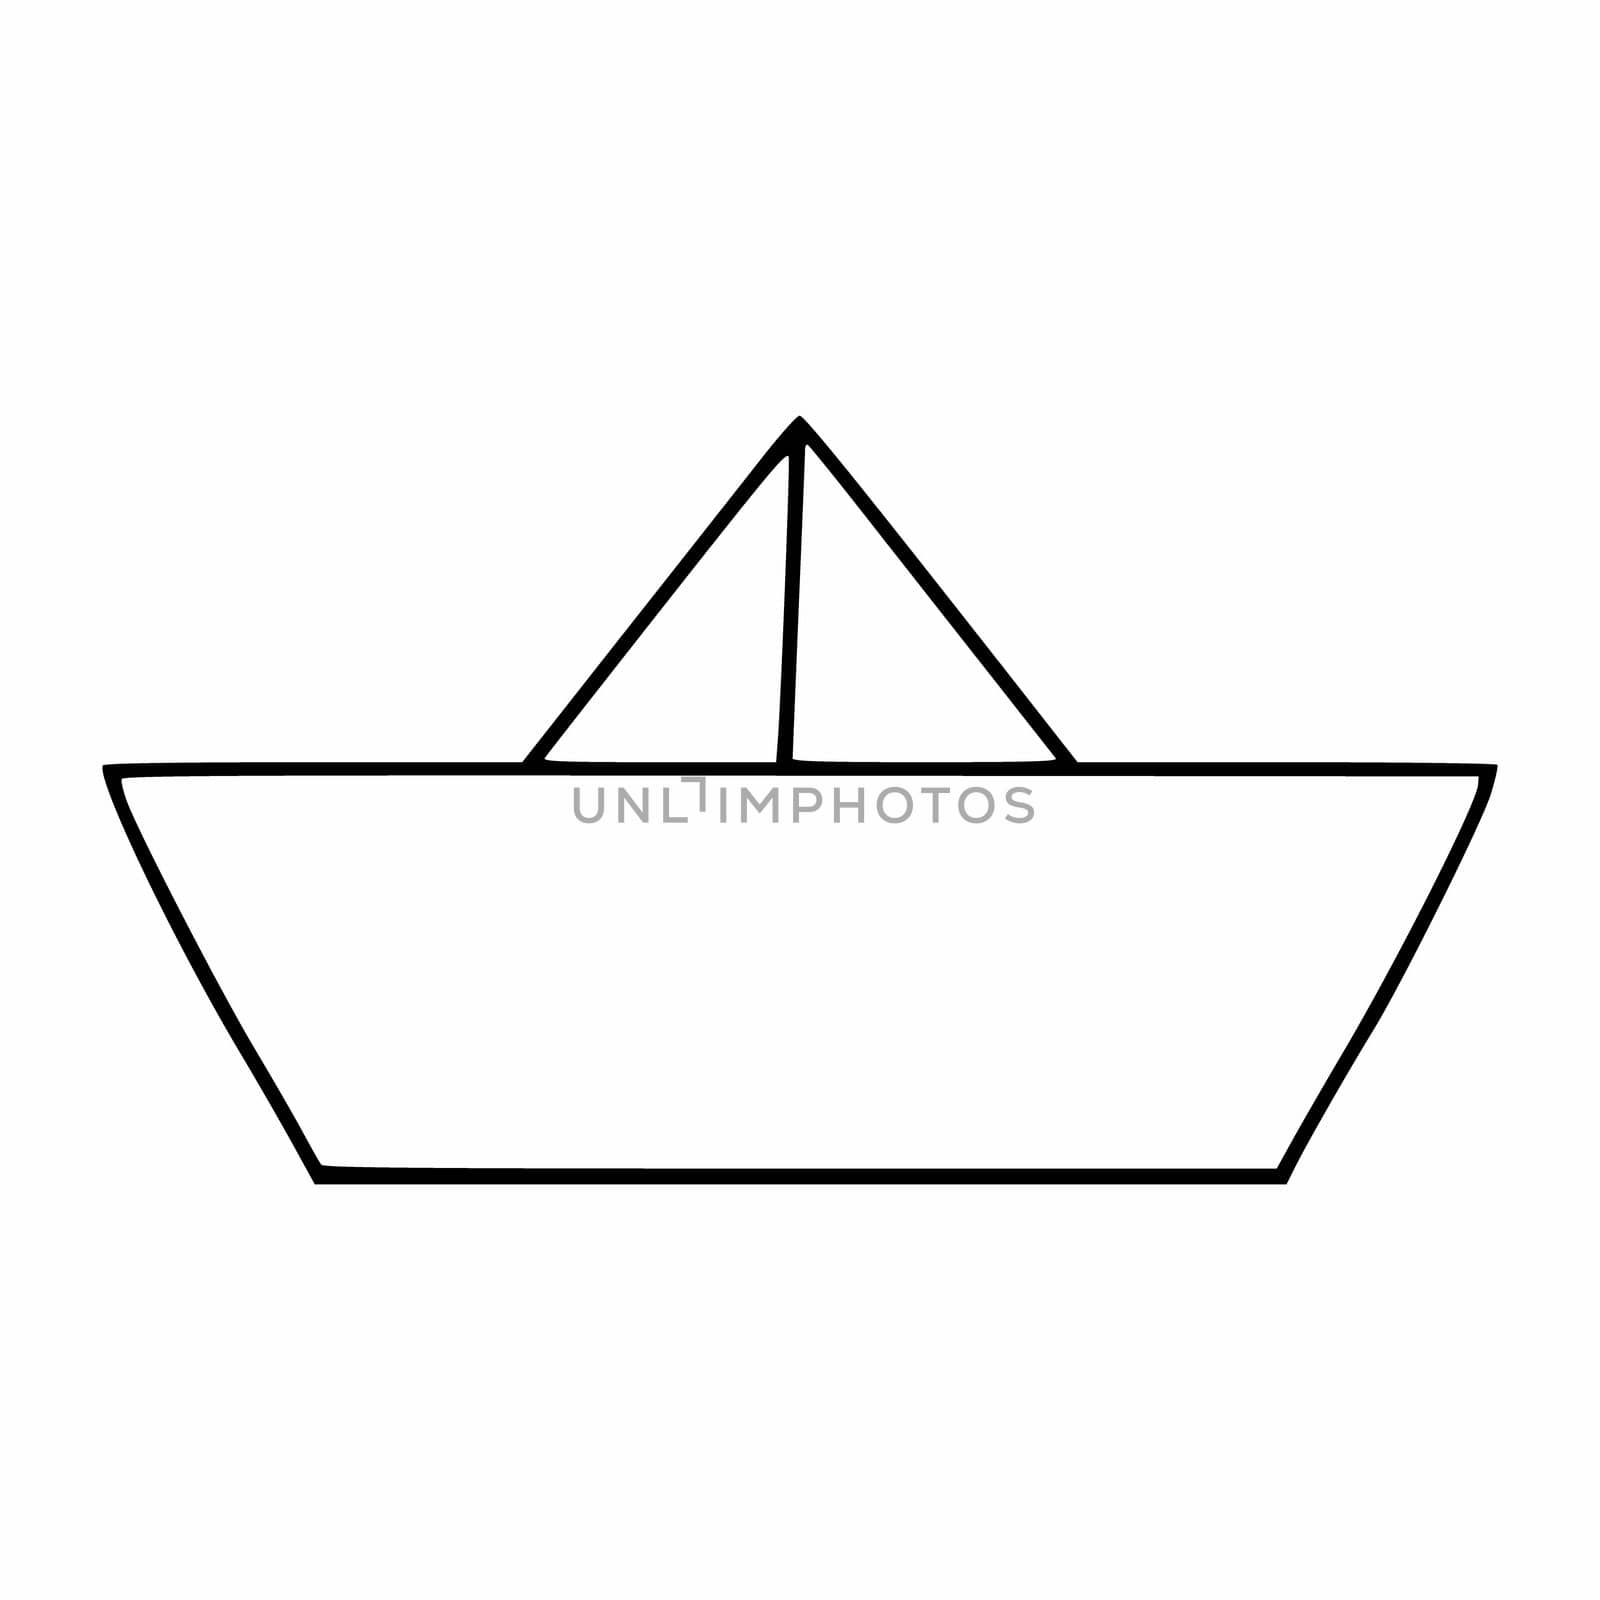 Paper boat in the style of doodle. Vector icon with a contour line.  Japanese origami boat.